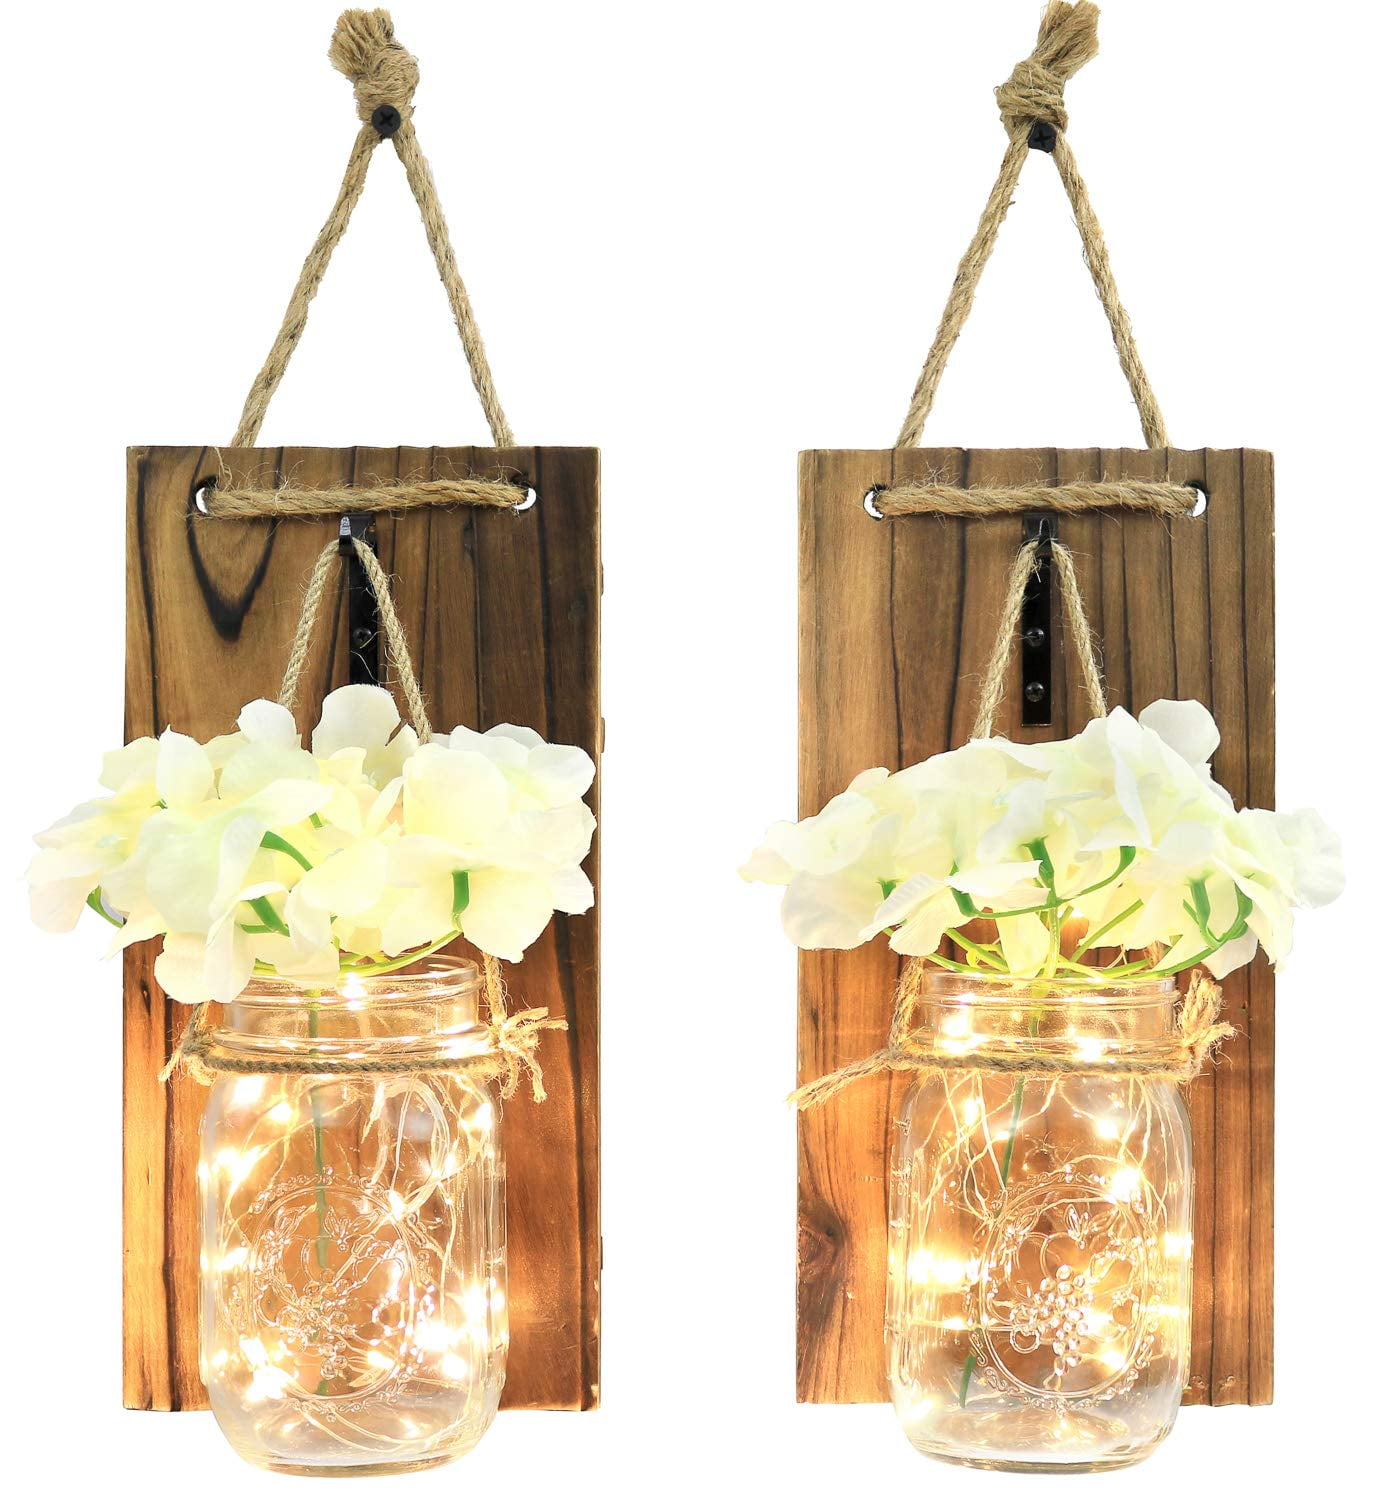 Homko Mason Jar Sconce With Led Fairy Lights And Flowers Rustic Hanging Mason 